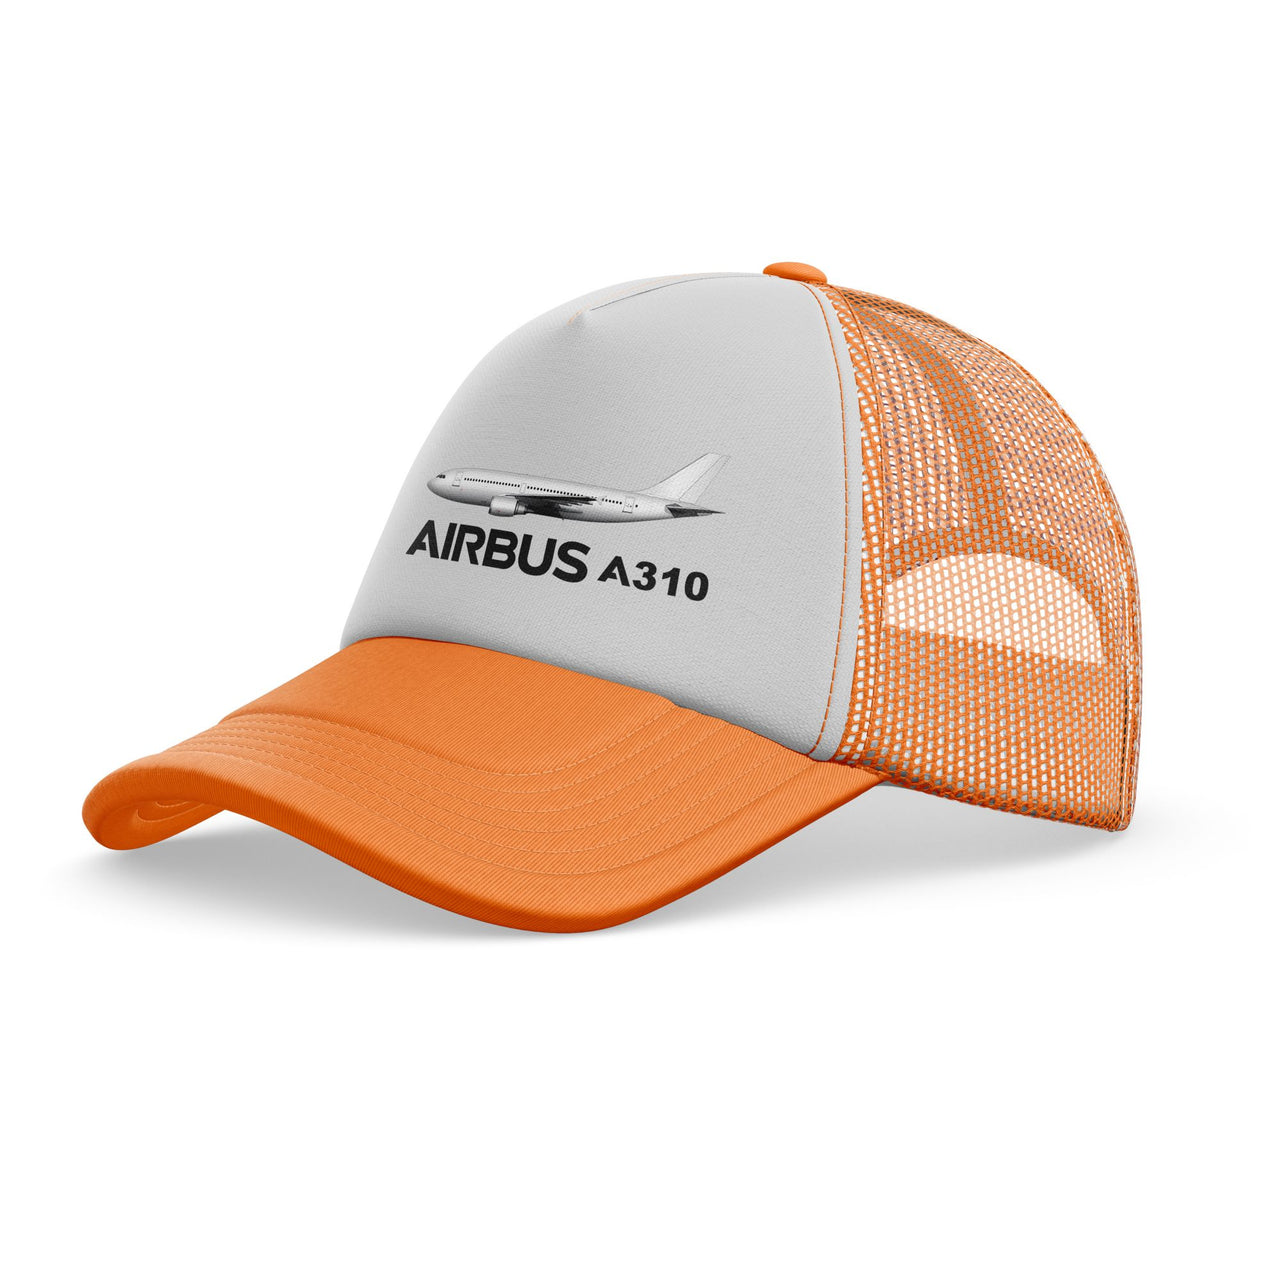 The Airbus A310 Designed Trucker Caps & Hats